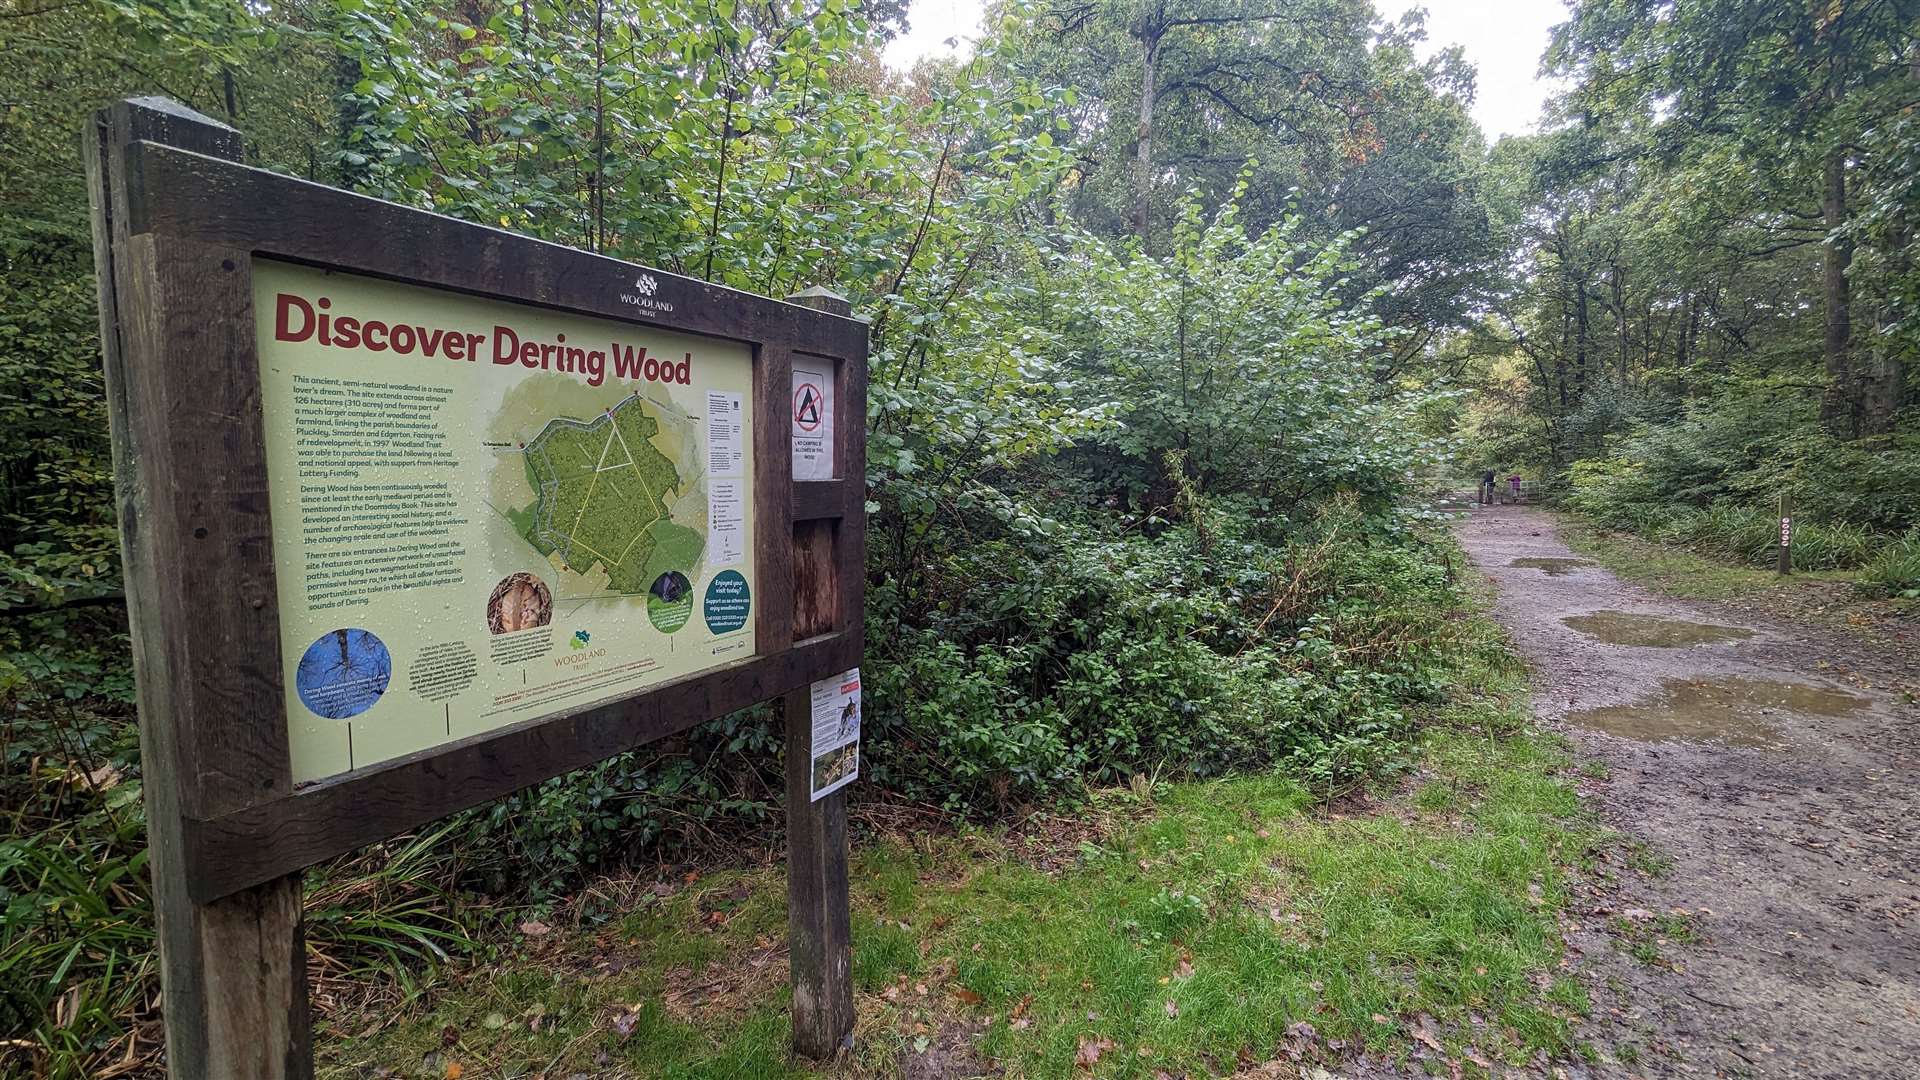 An information board at the entrance to Dering Wood